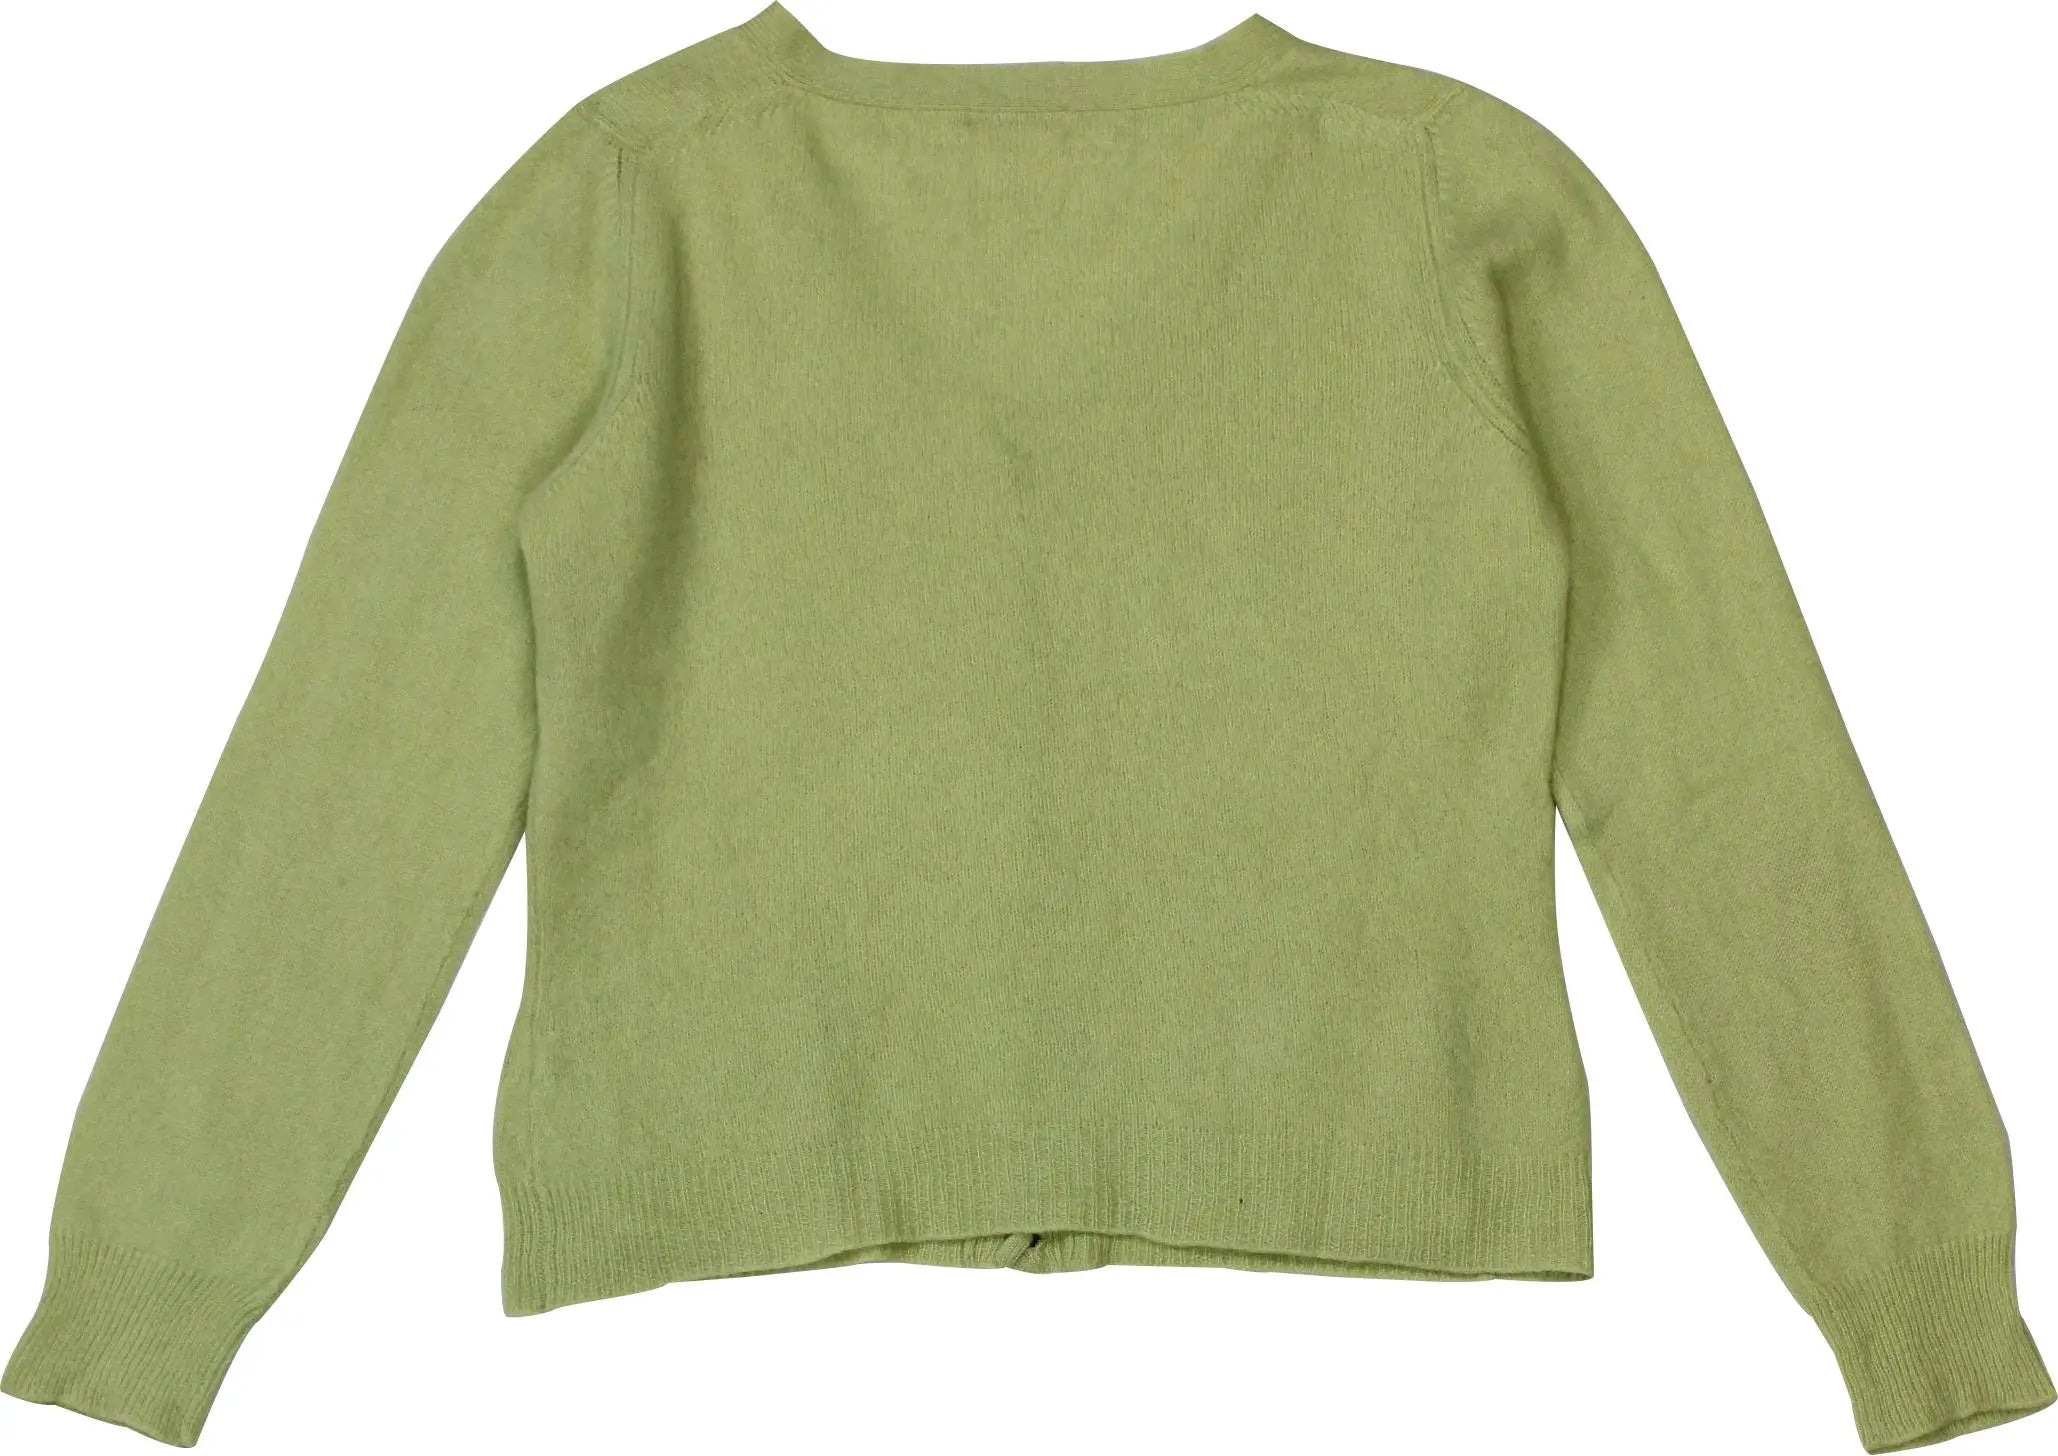 Andrea Fenzi - Green Cashmere Cardigan by Andrea Fenzi- ThriftTale.com - Vintage and second handclothing